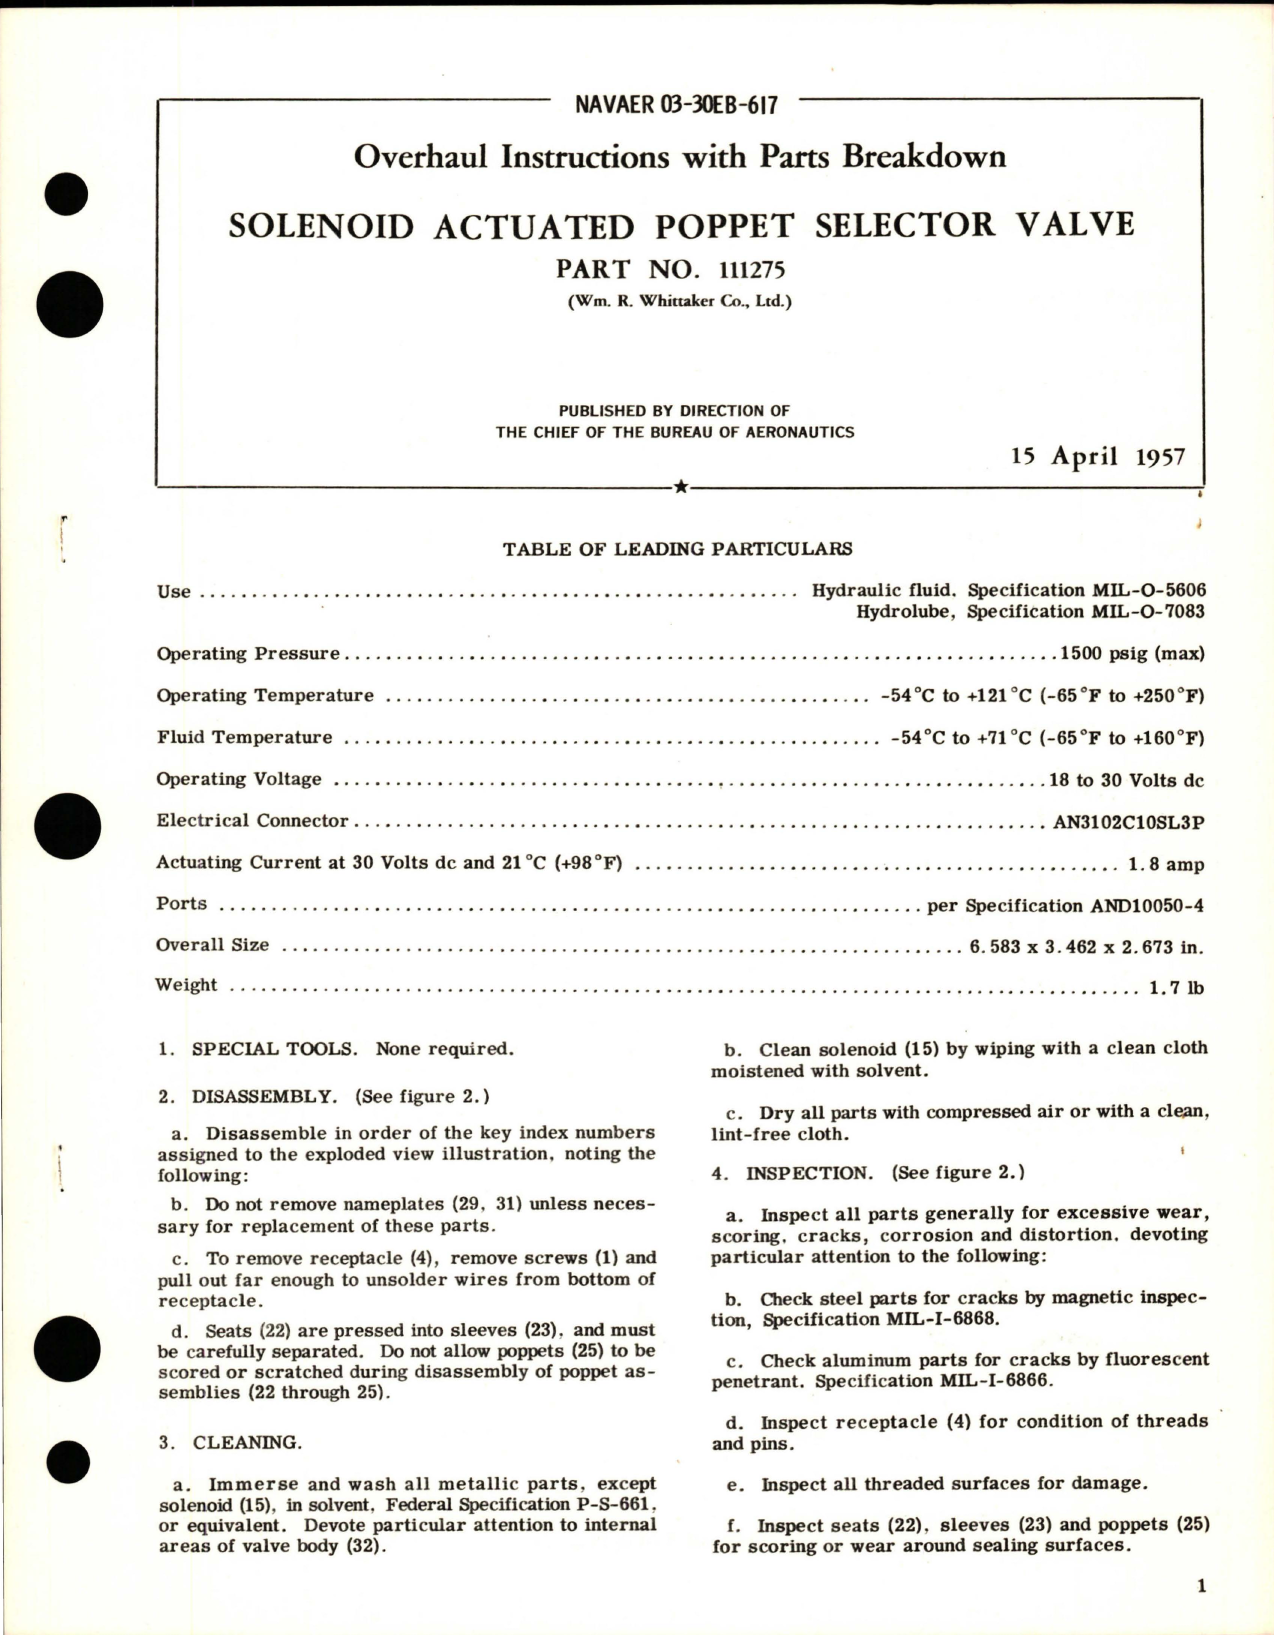 Sample page 1 from AirCorps Library document: Overhaul Instructions with Parts Breakdown for Solenoid Actuated Poppet Selector Valve - Part 111275